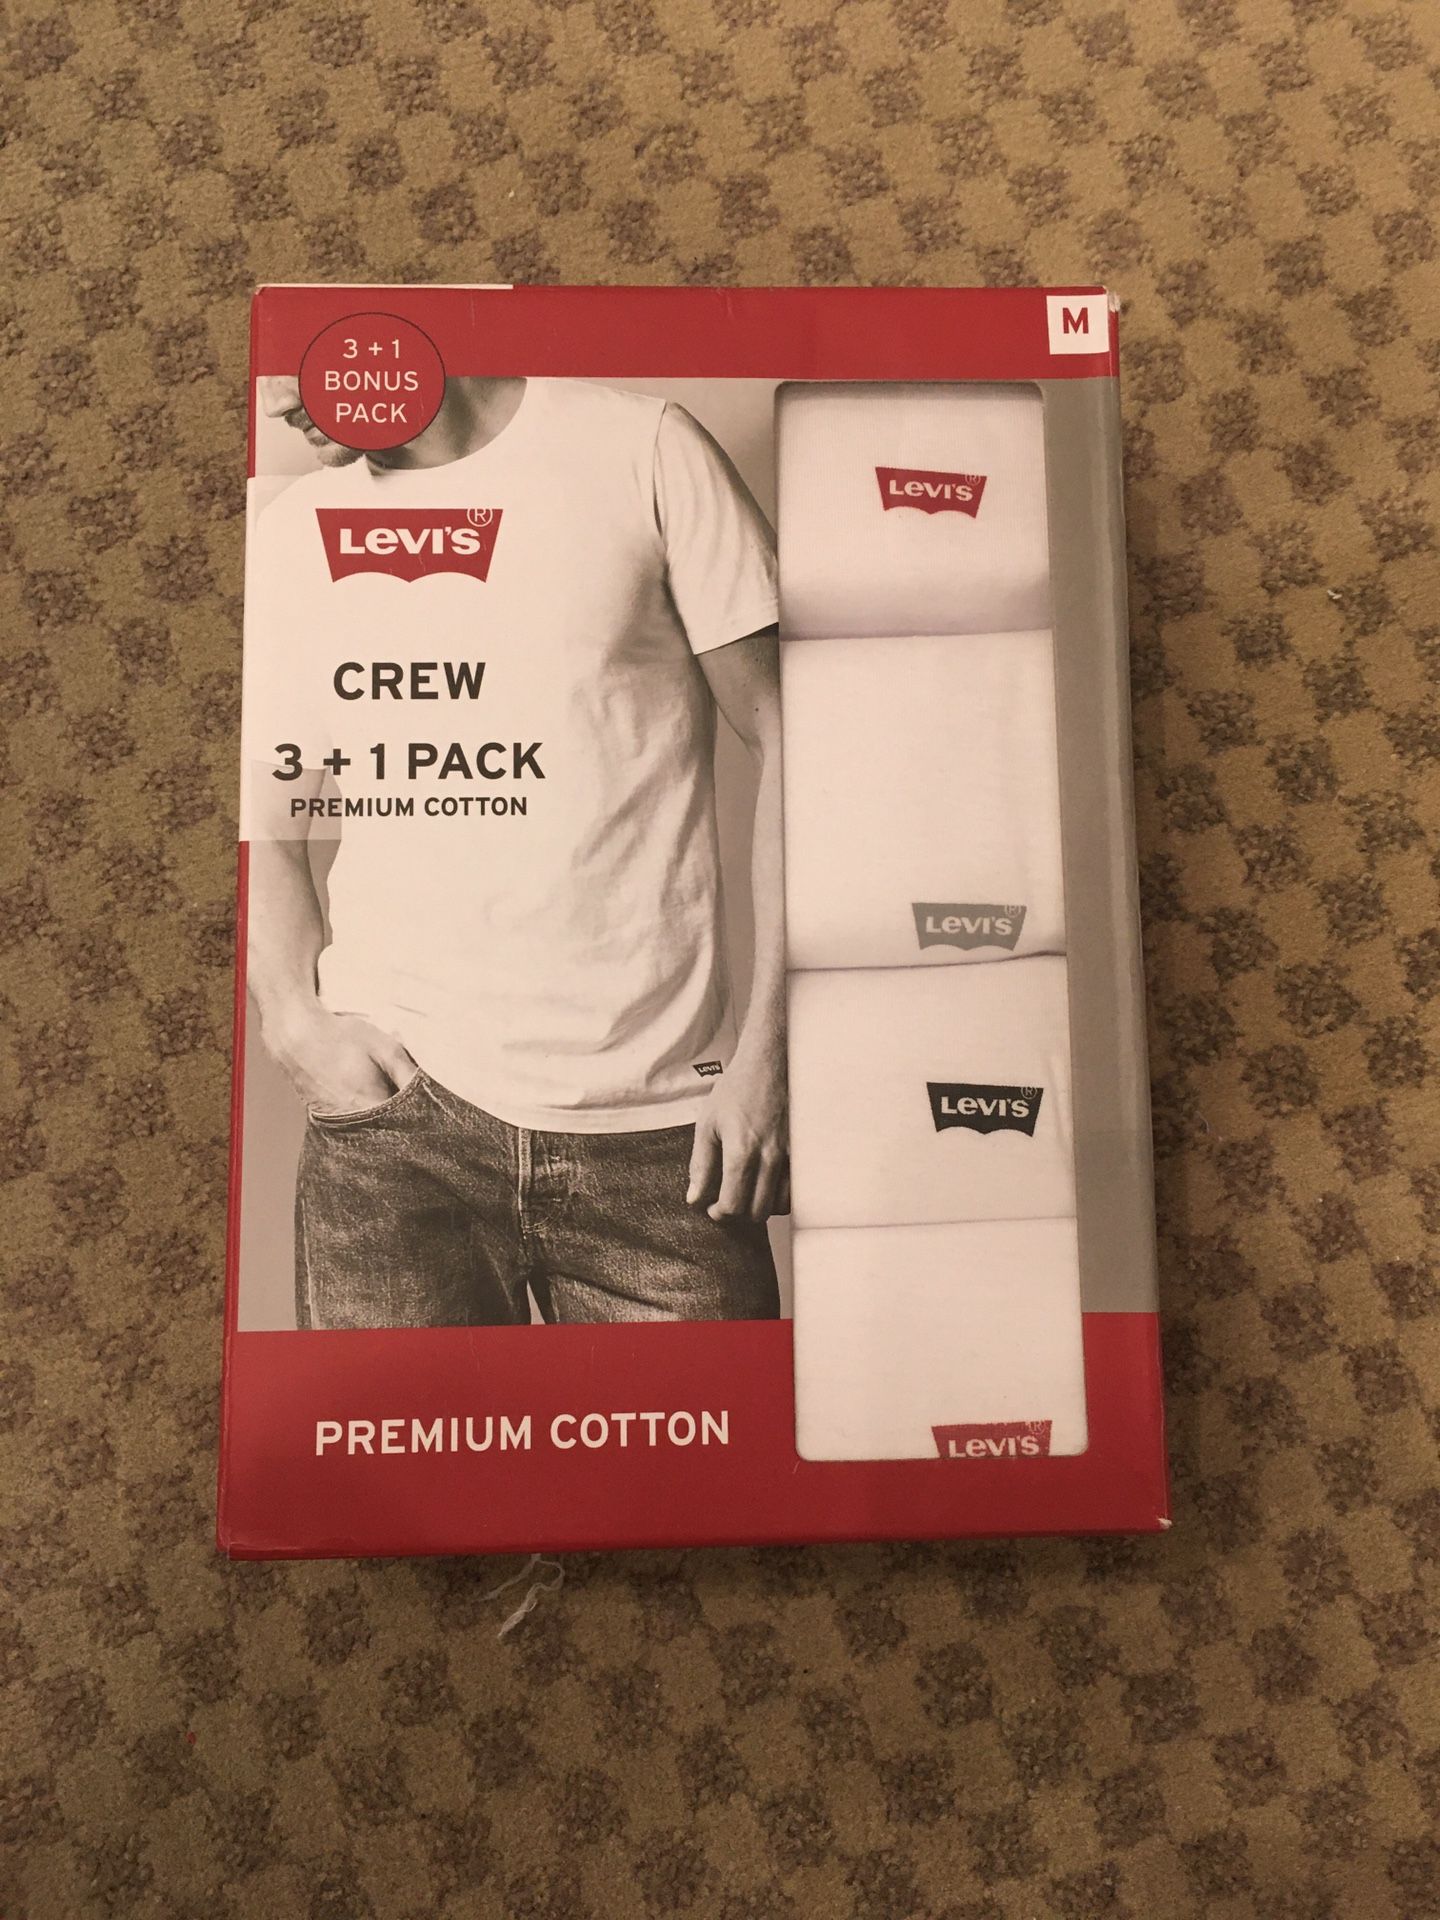 NWT Levi’s crew neck T-shirt 4packs size S or M